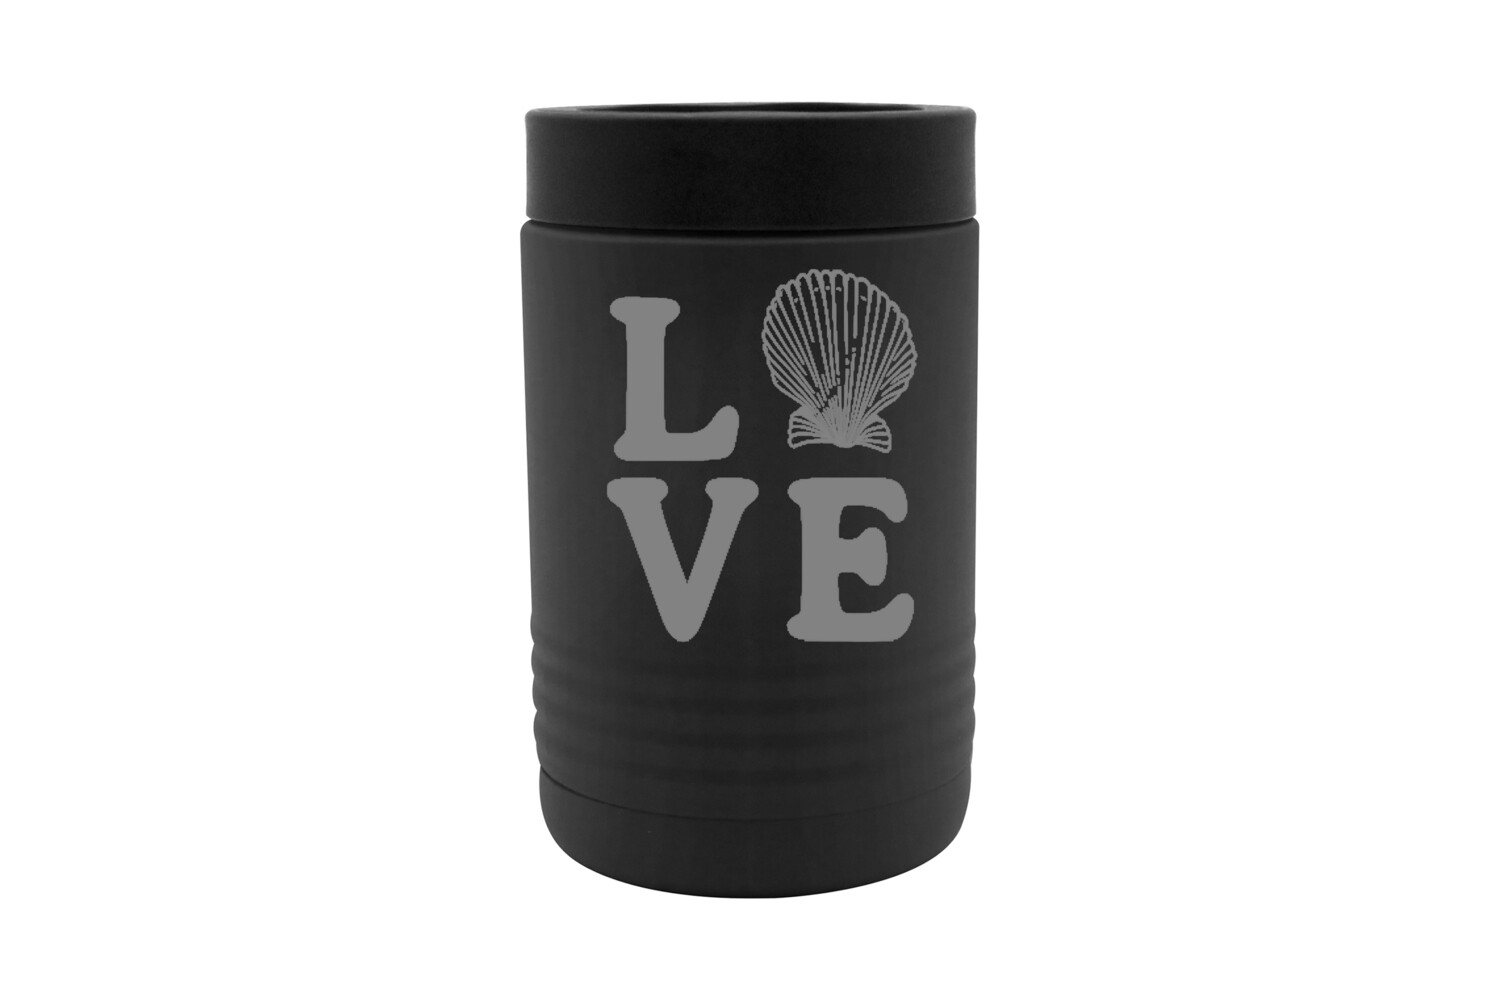 Love with Seashell Insulated Beverage Holder